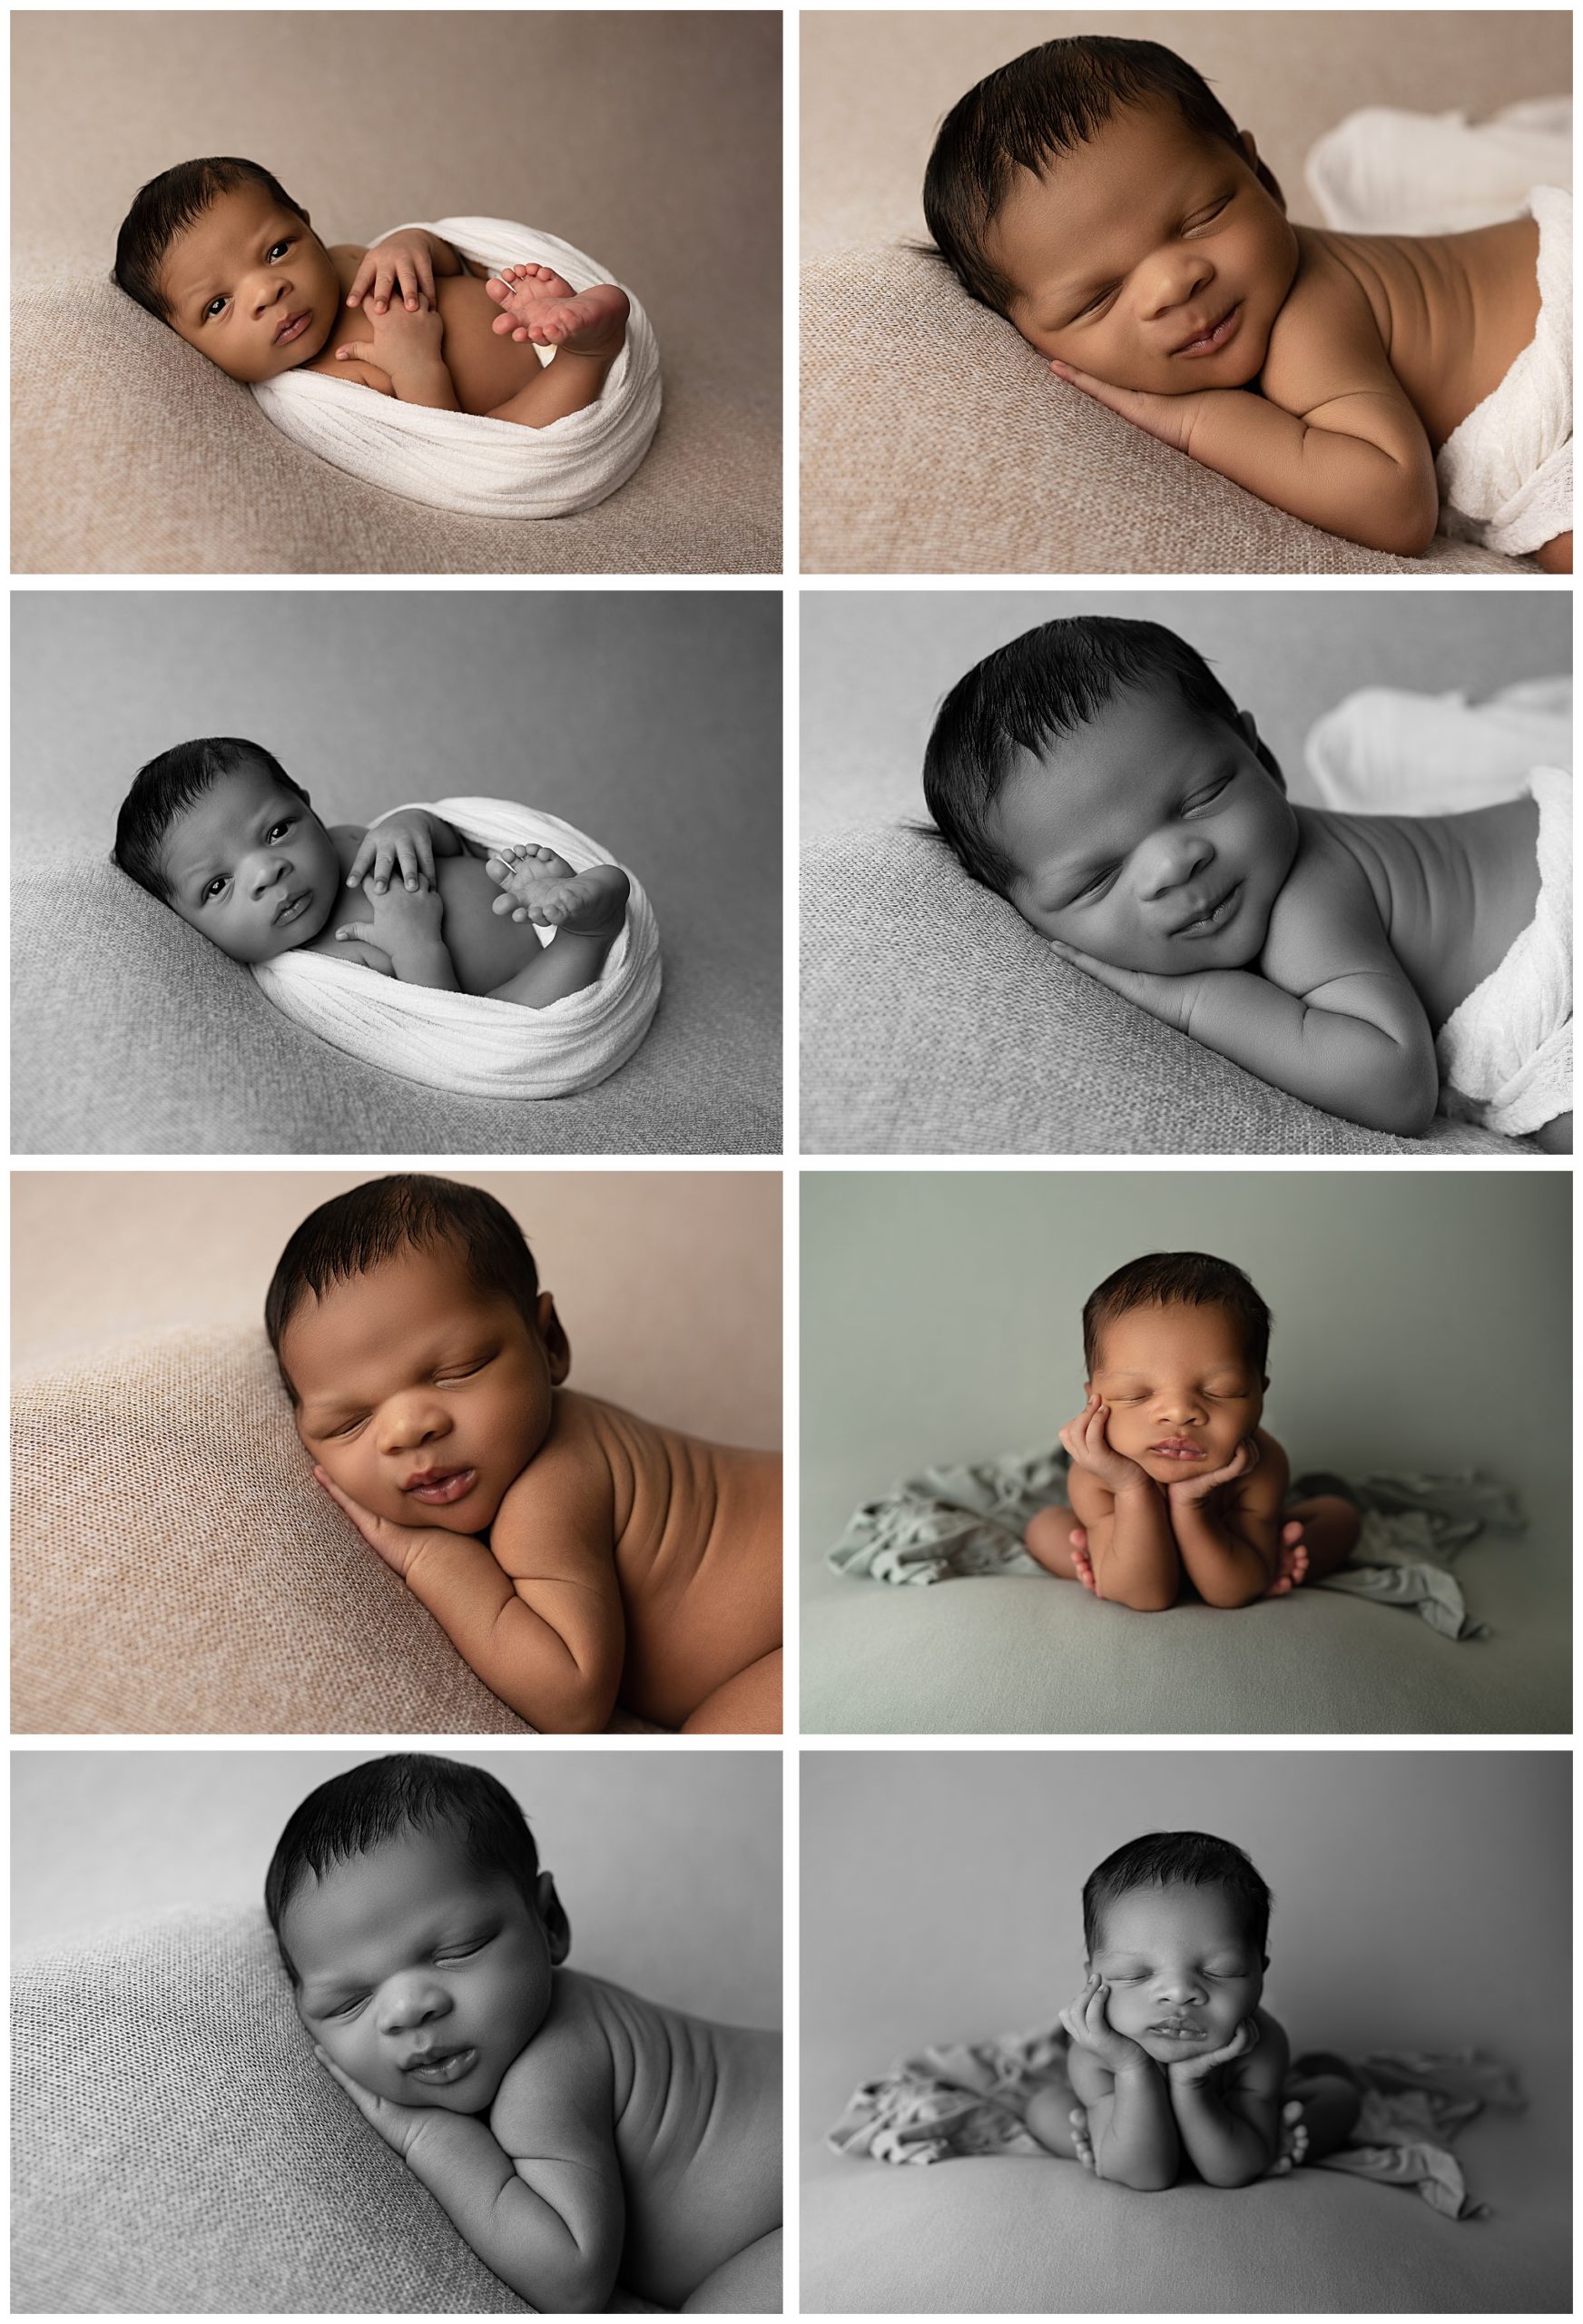 Rainbow baby montage, smiling newborn in a white blanket, sleepy newborn in a white blanket